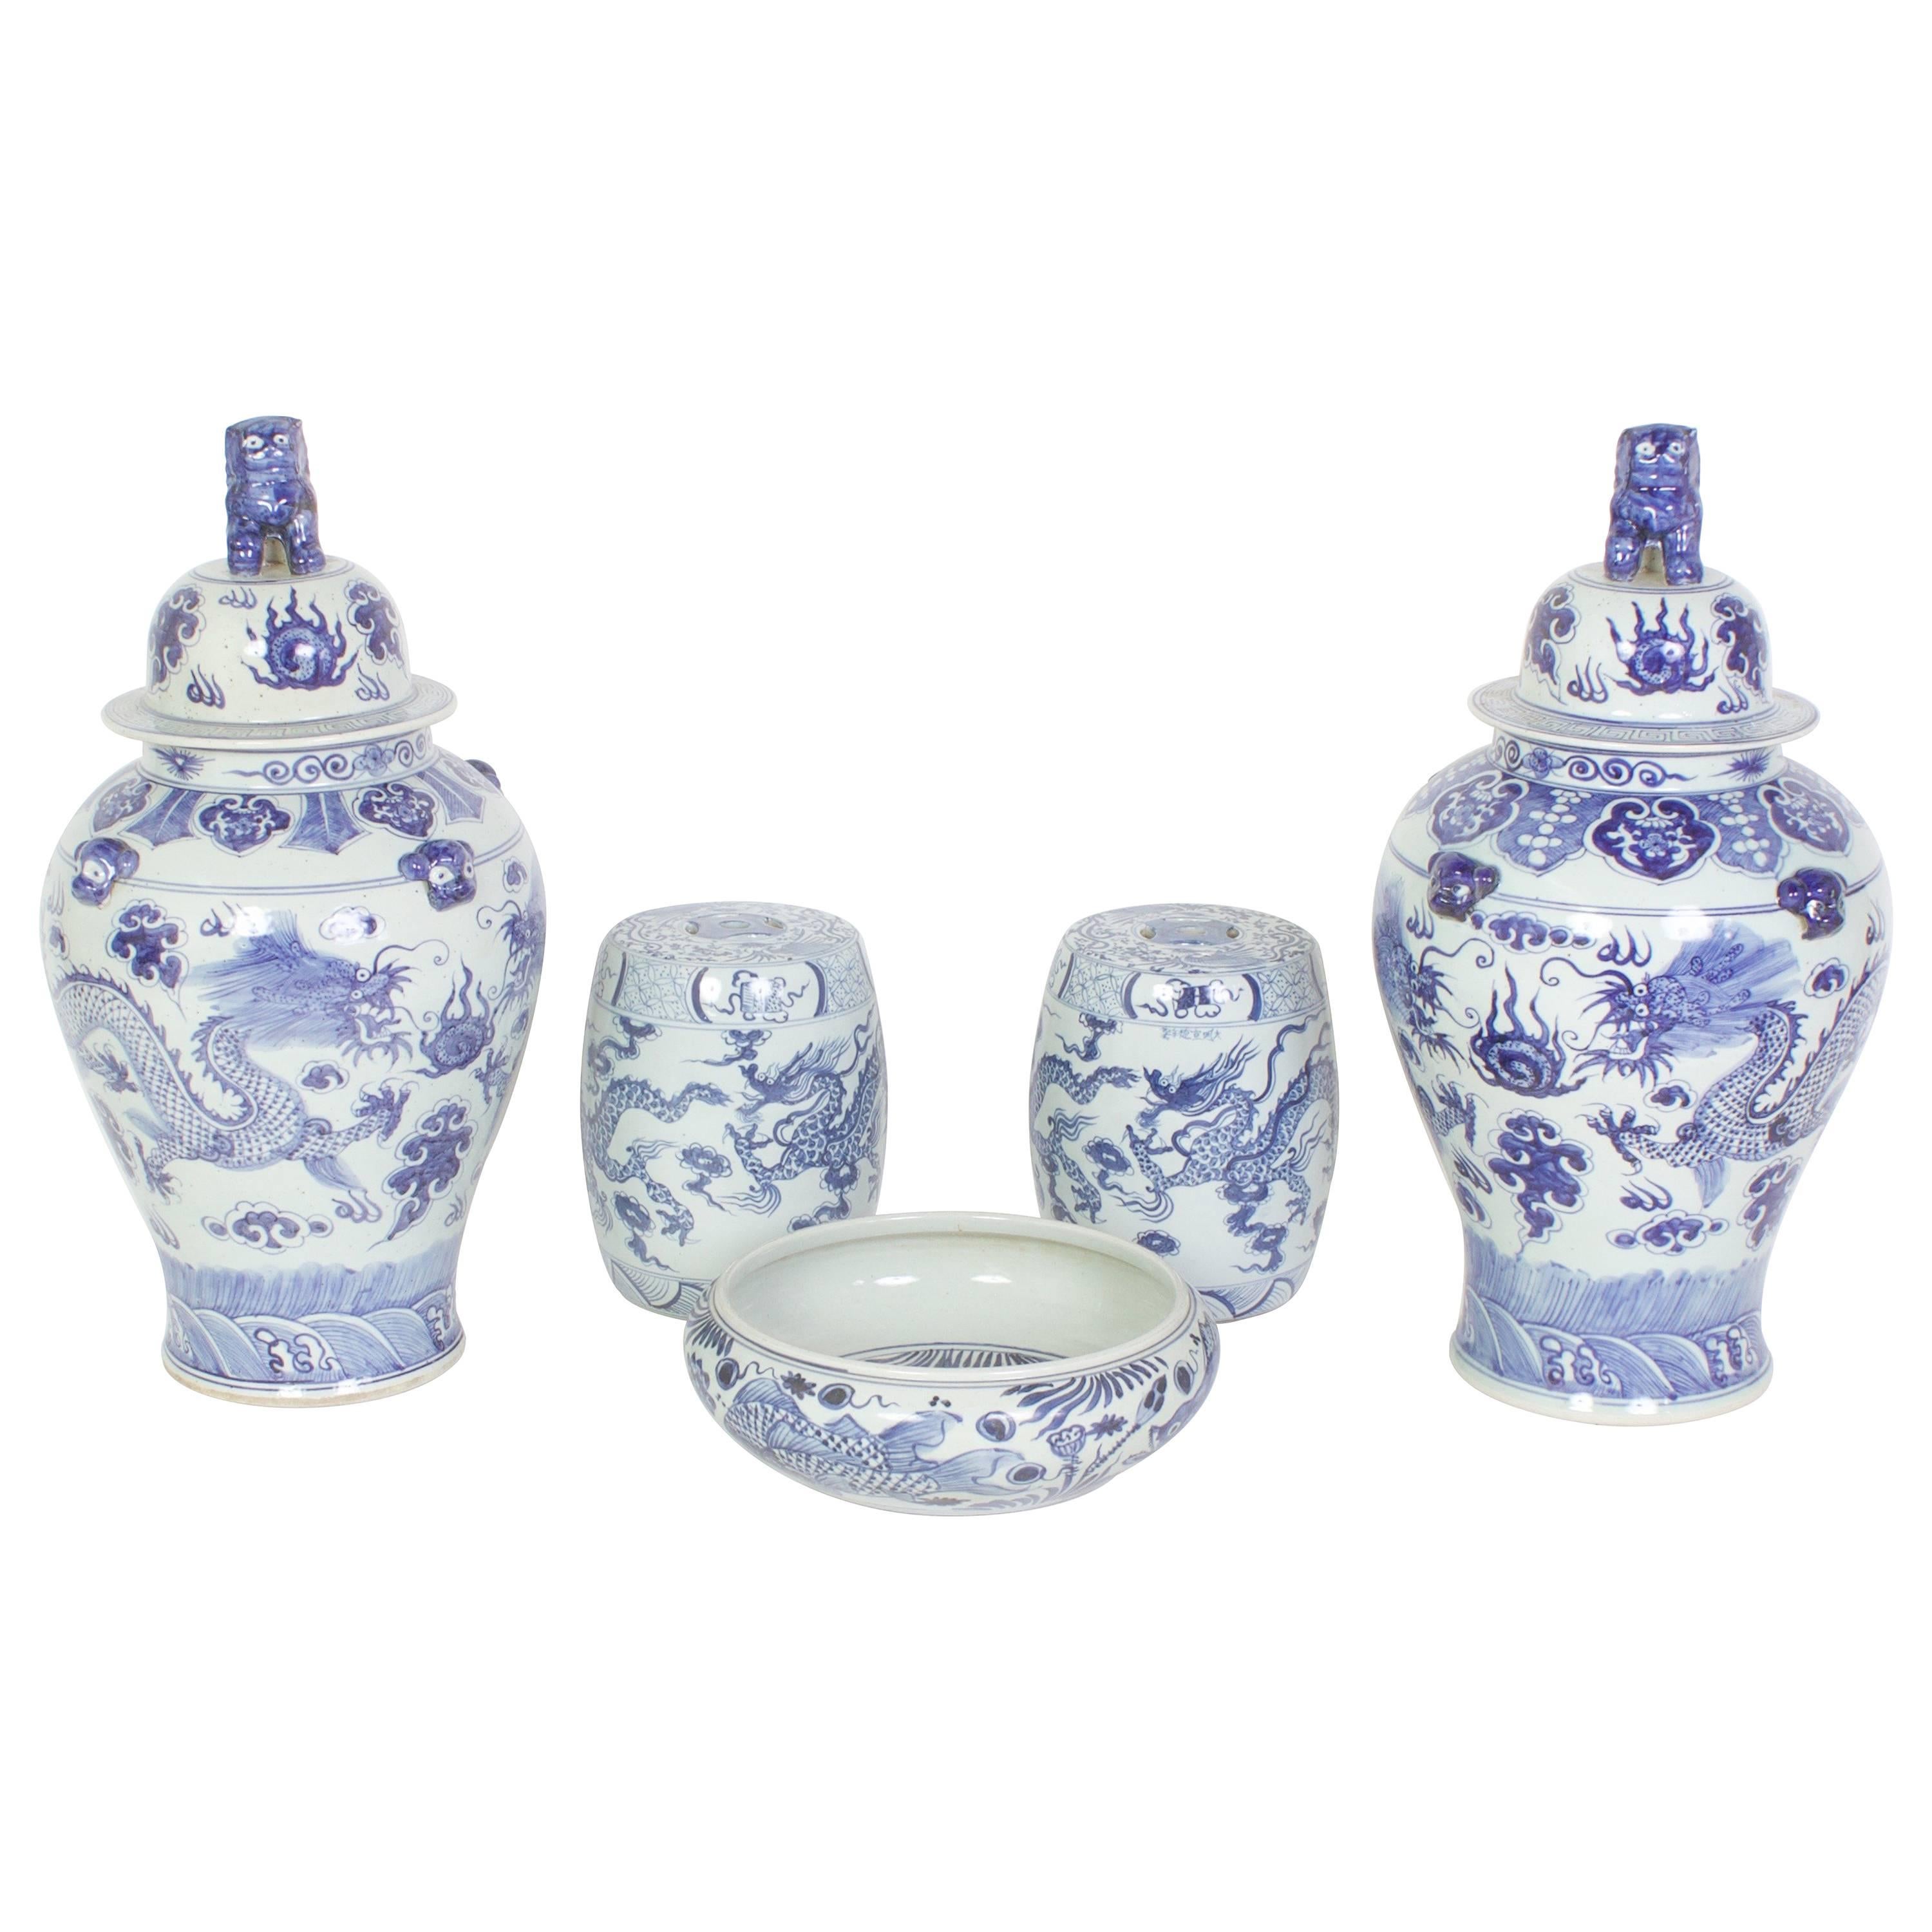 Pair of Chinese Export Lidded Jars, Two Miniature Garden Stools and a Bowl